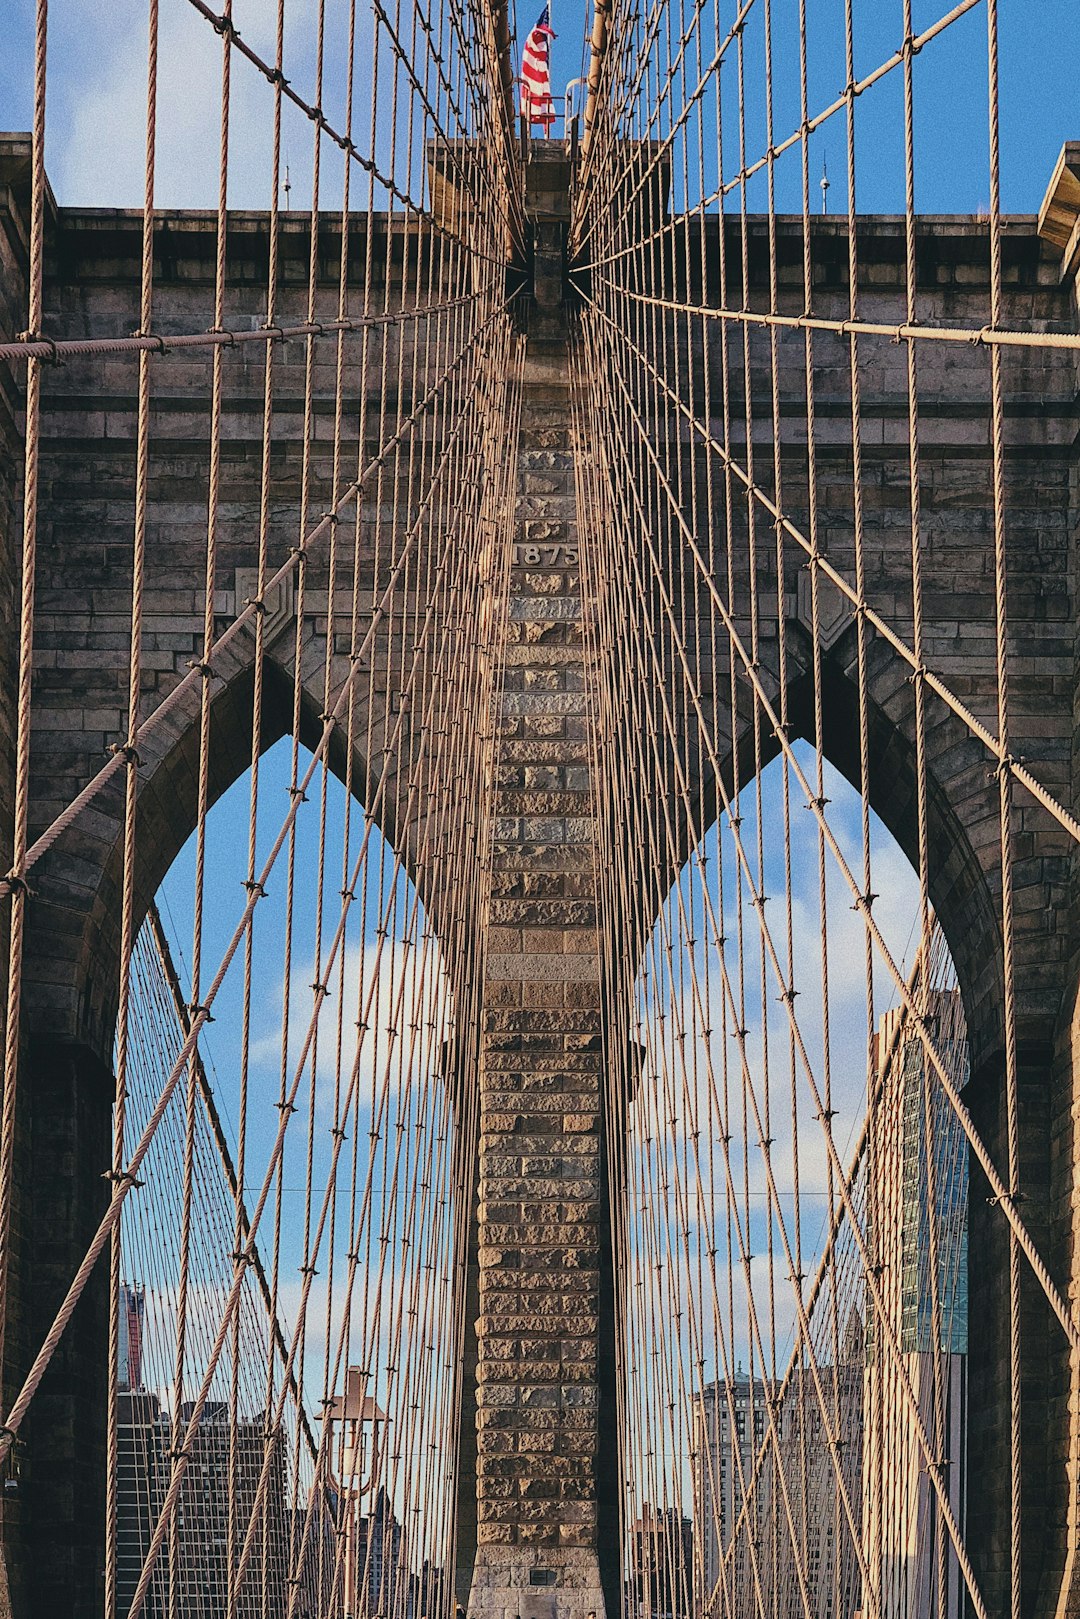 Travel Tips and Stories of Brooklyn Bridge in United States